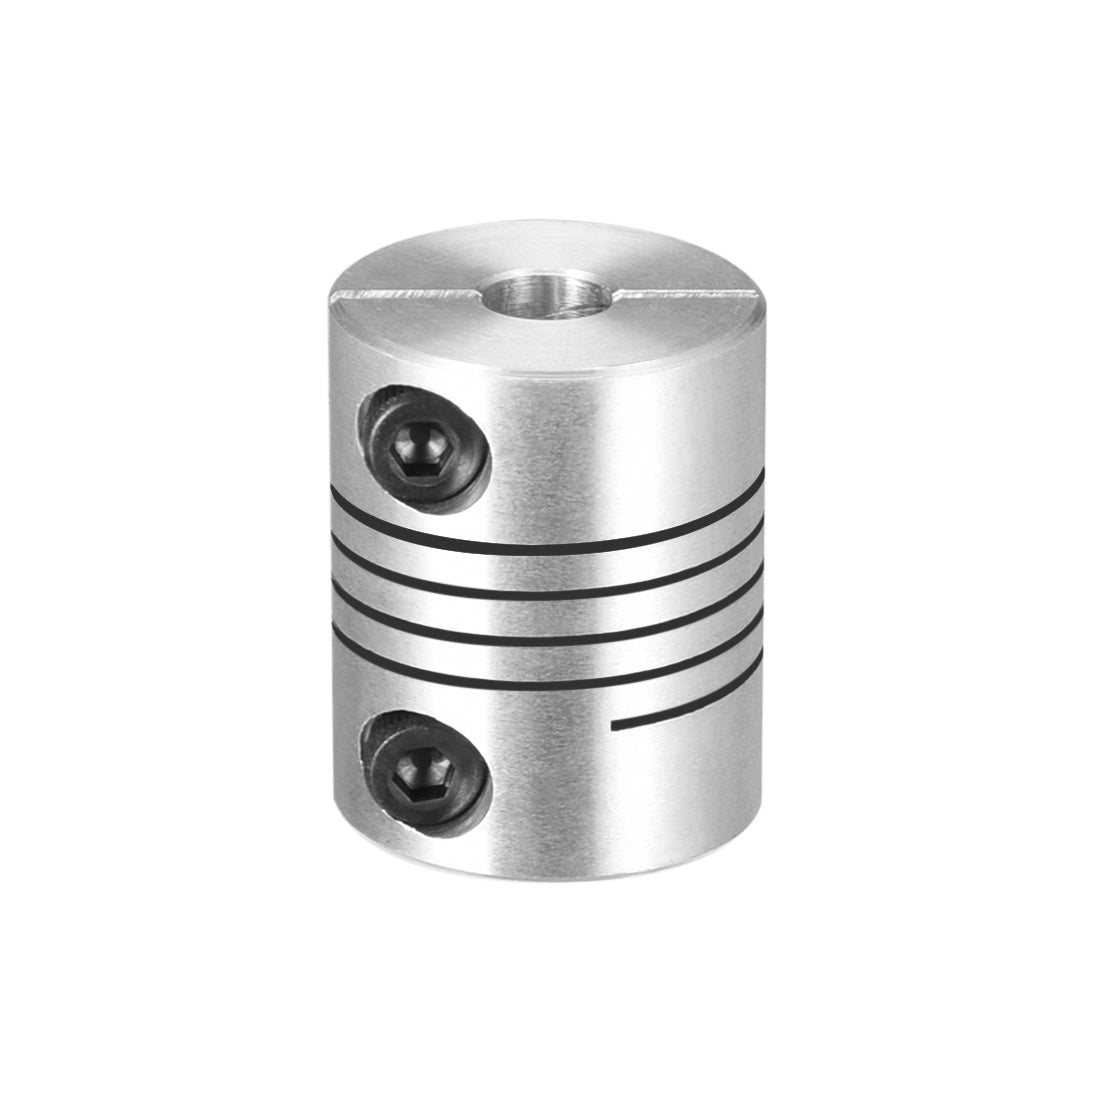 uxcell Uxcell Motor Shaft 6mm to 6mm Helical Beam Coupler Coupling 20mm Dia 25mm Length